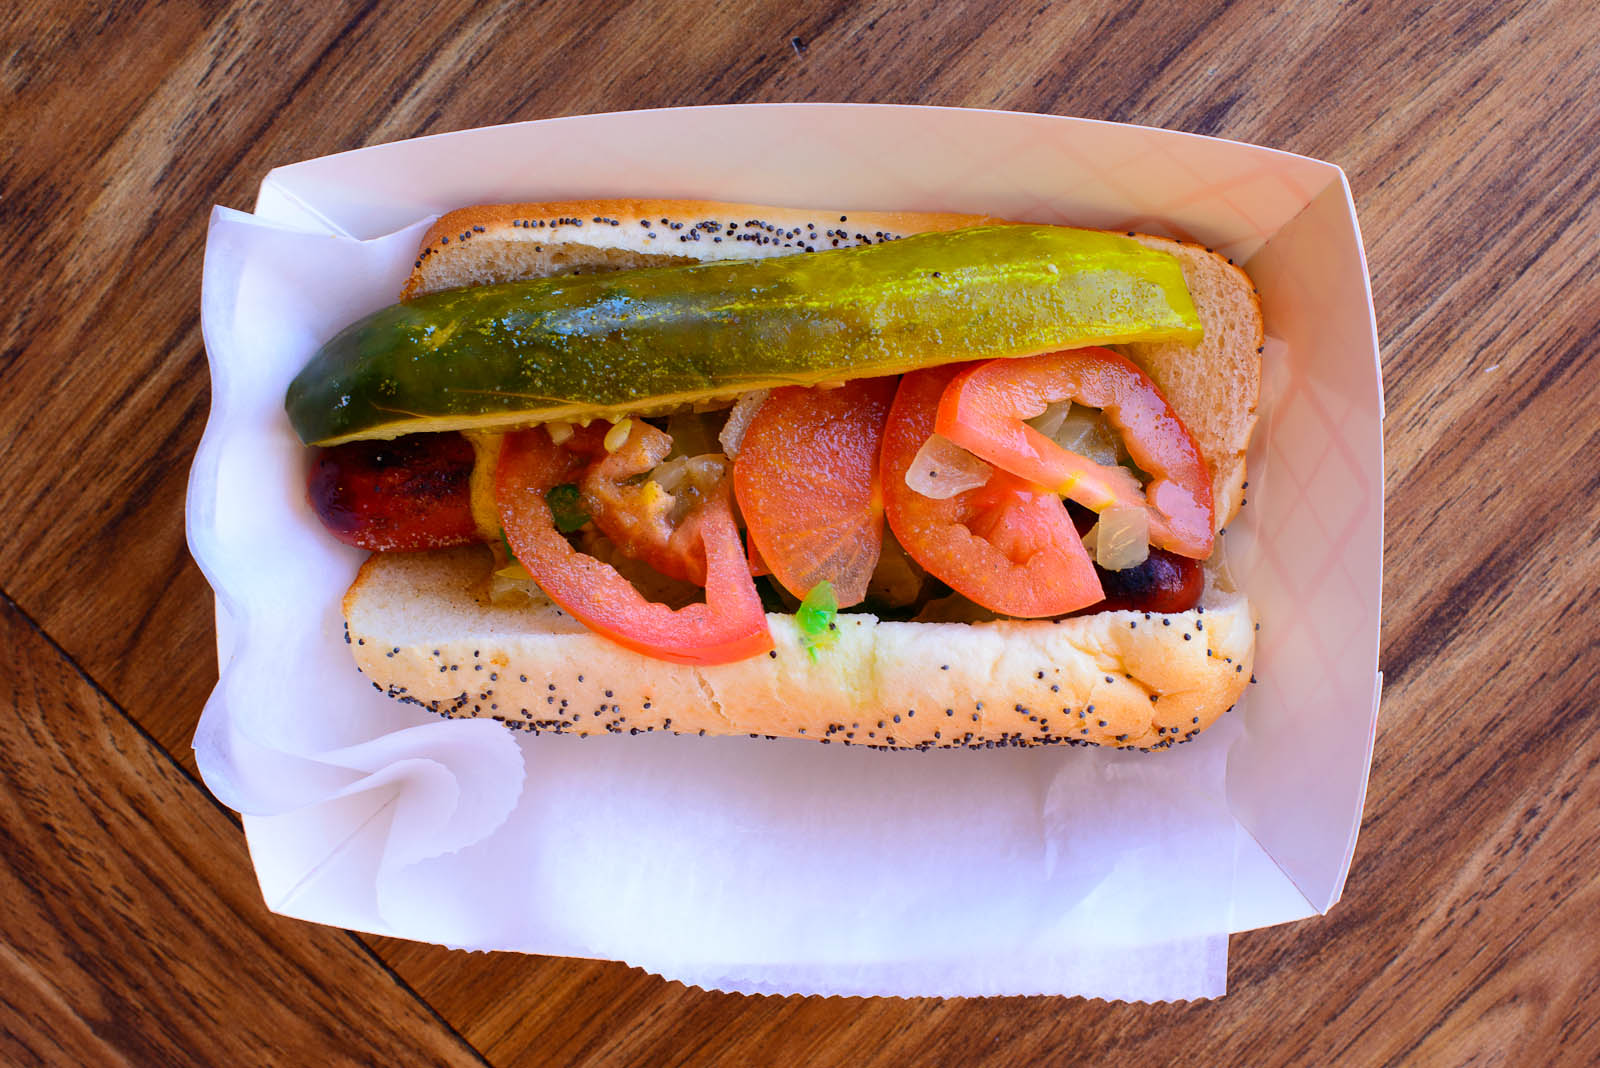 The Dog - Chicago-style hot dog with all the trimmings (mustard,